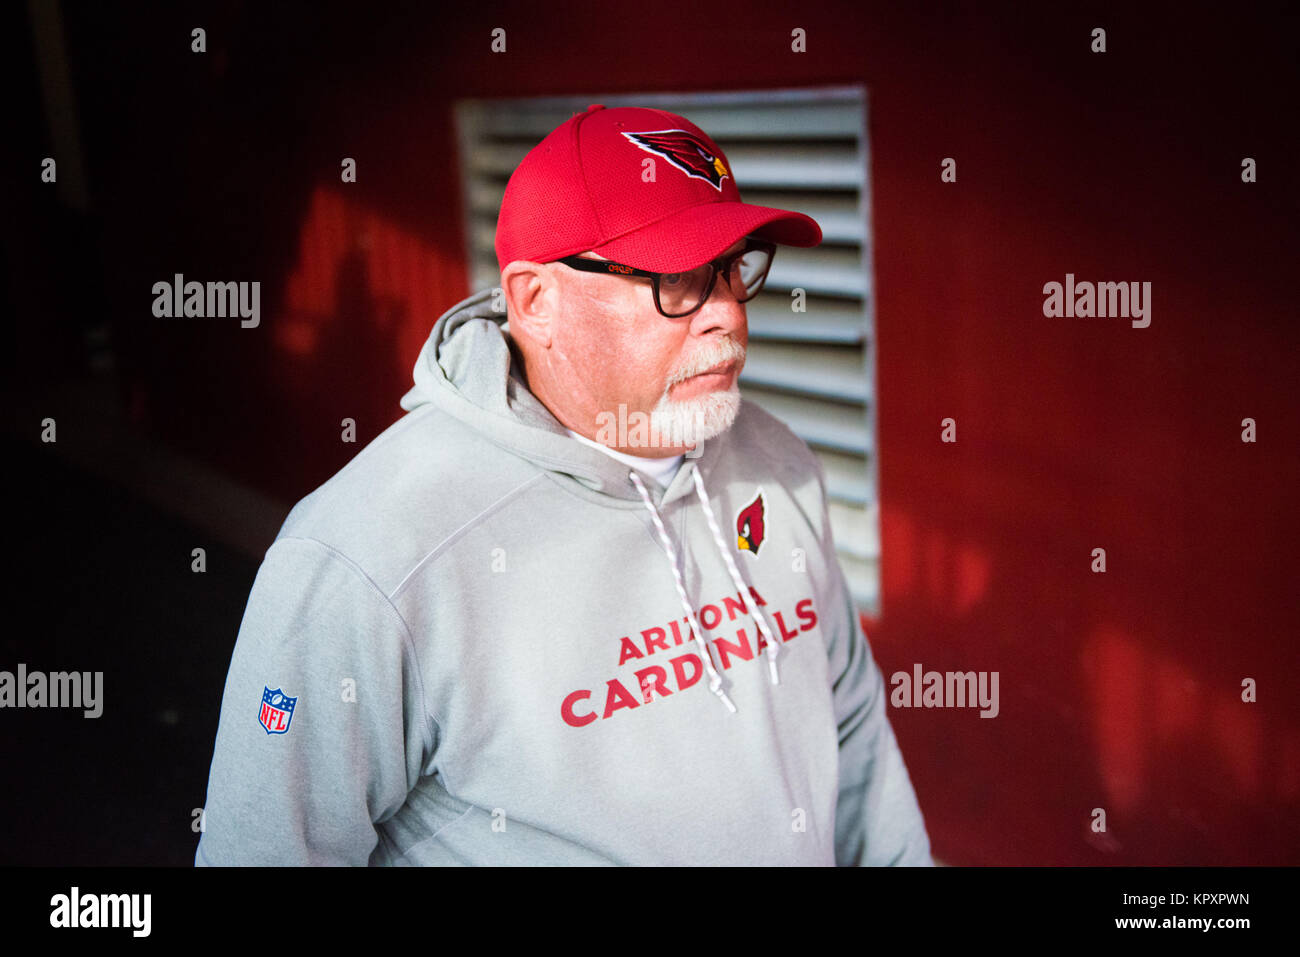 Landover, MD, USA. 17th Dec, 2017. Arizona Cardinals head coach Bruce Arians walks onto the field before the matchup between the Arizona Cardinals and the Washington Redskins at FedEx Field in Landover, MD. Credit: csm/Alamy Live News Stock Photo